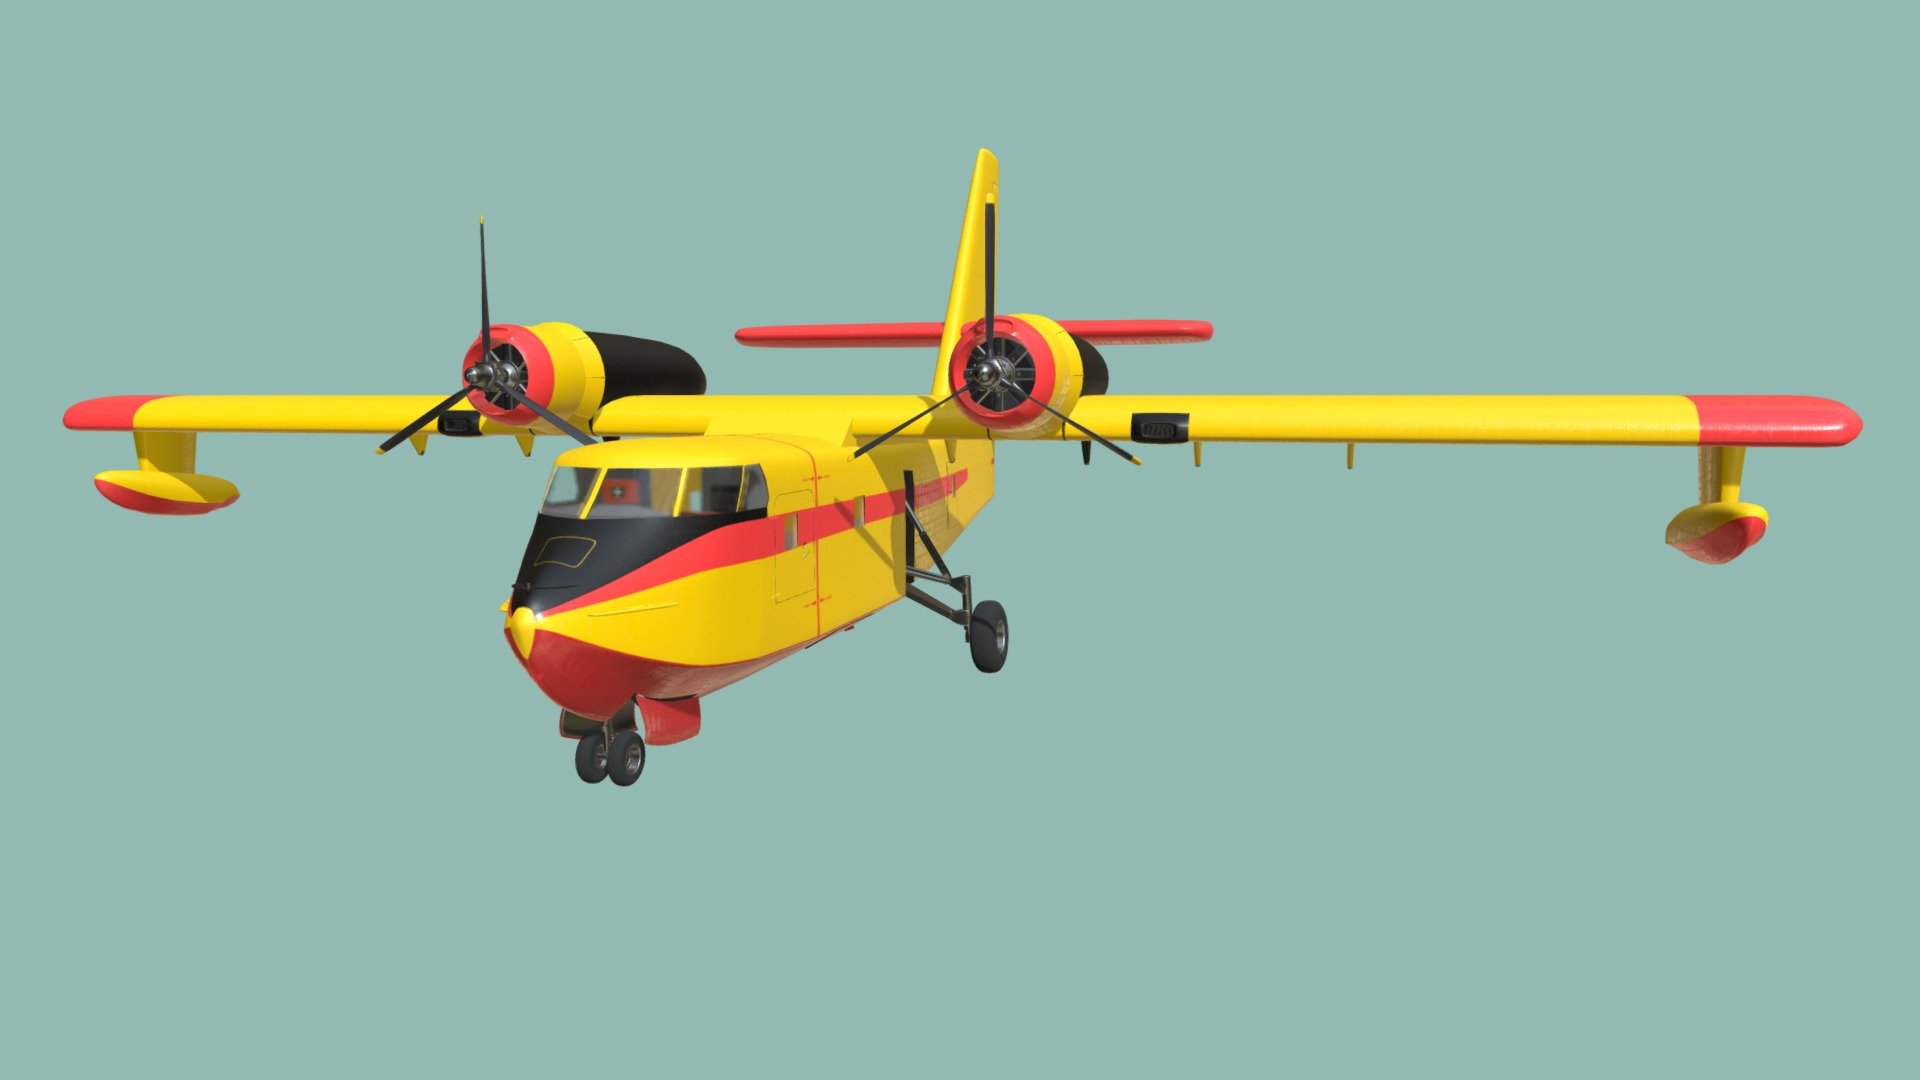 Canadair aircraft model with PBR materials. Made in Blender.

Contains assets from ambientCG.com, licensed under CC0 1.0 Universal 3d model